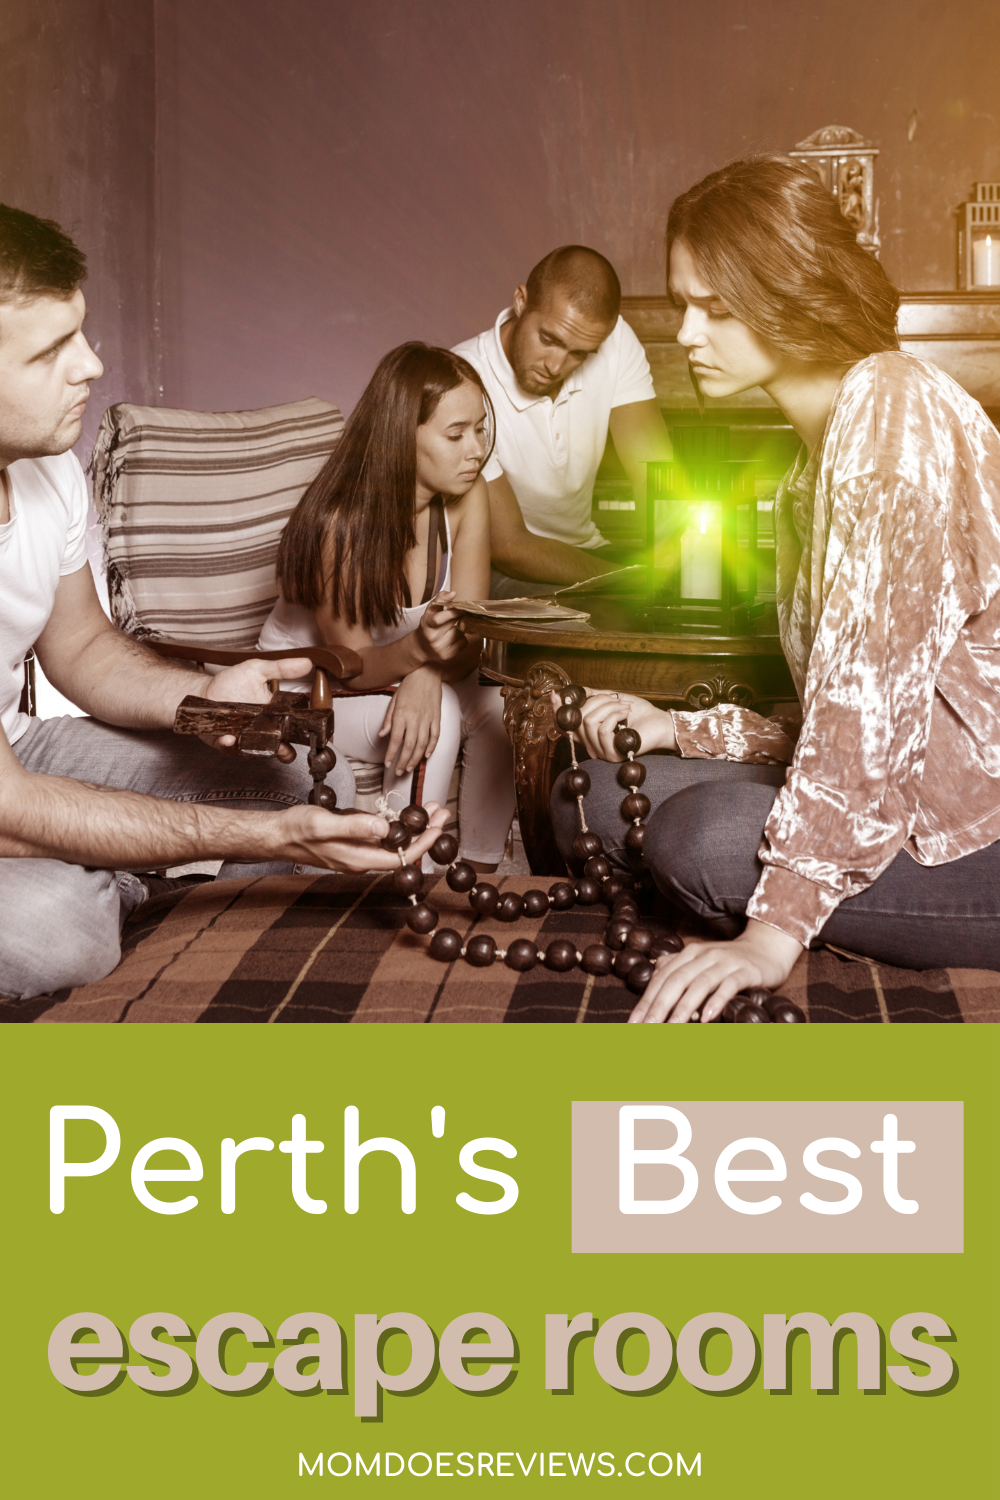 Perth's Best Escape Rooms That Will Give You the Time of Your Life